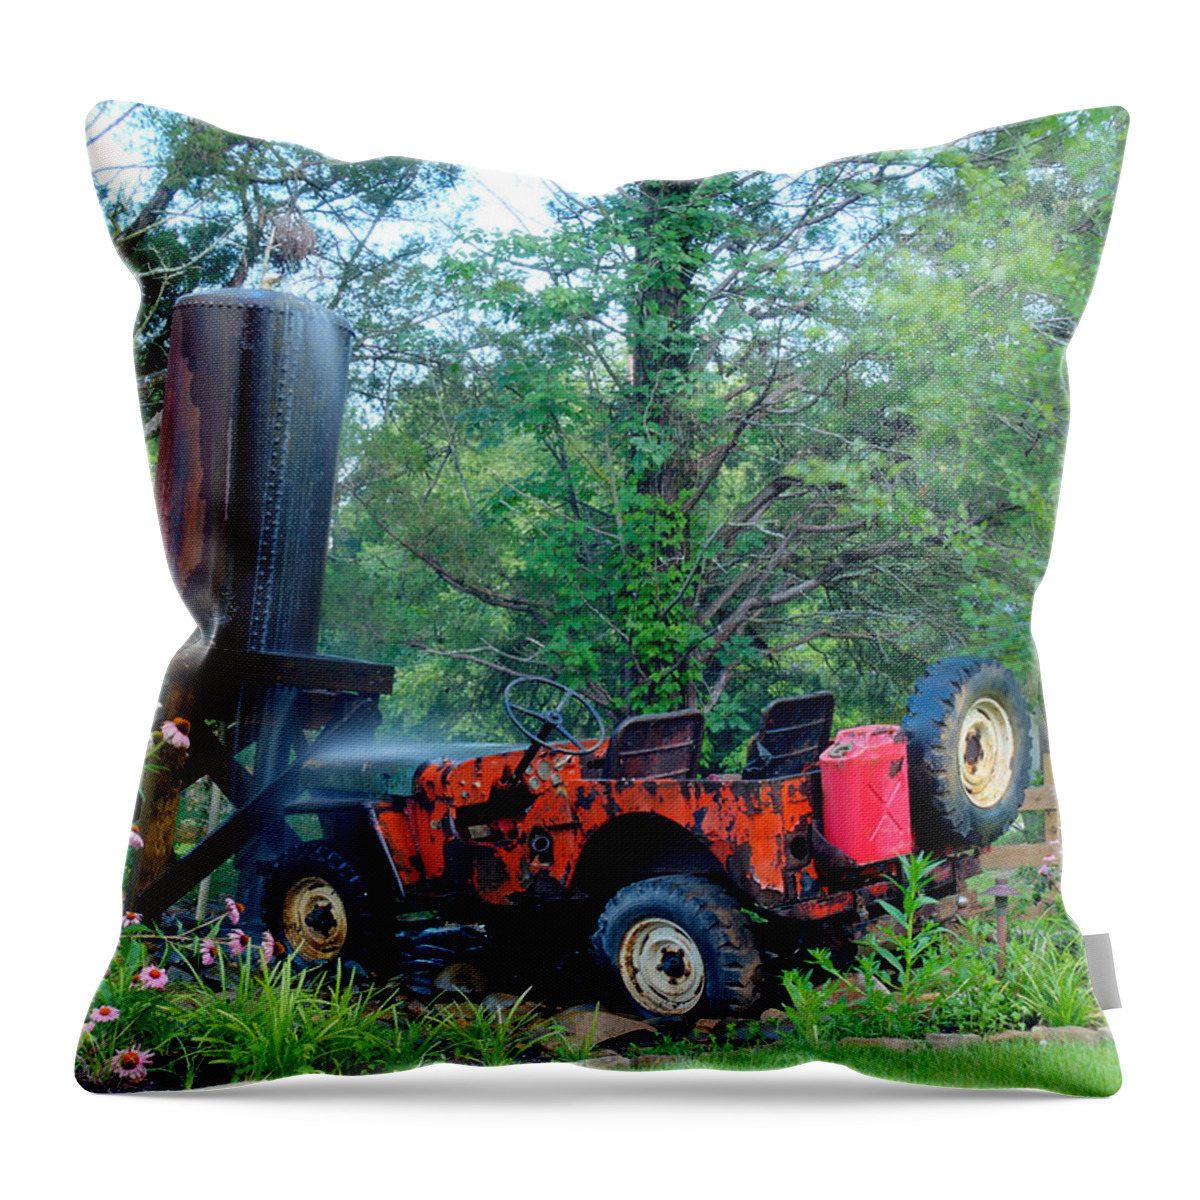 Lexington Throw Pillow featuring the photograph Wrong Turn by Charles Hite